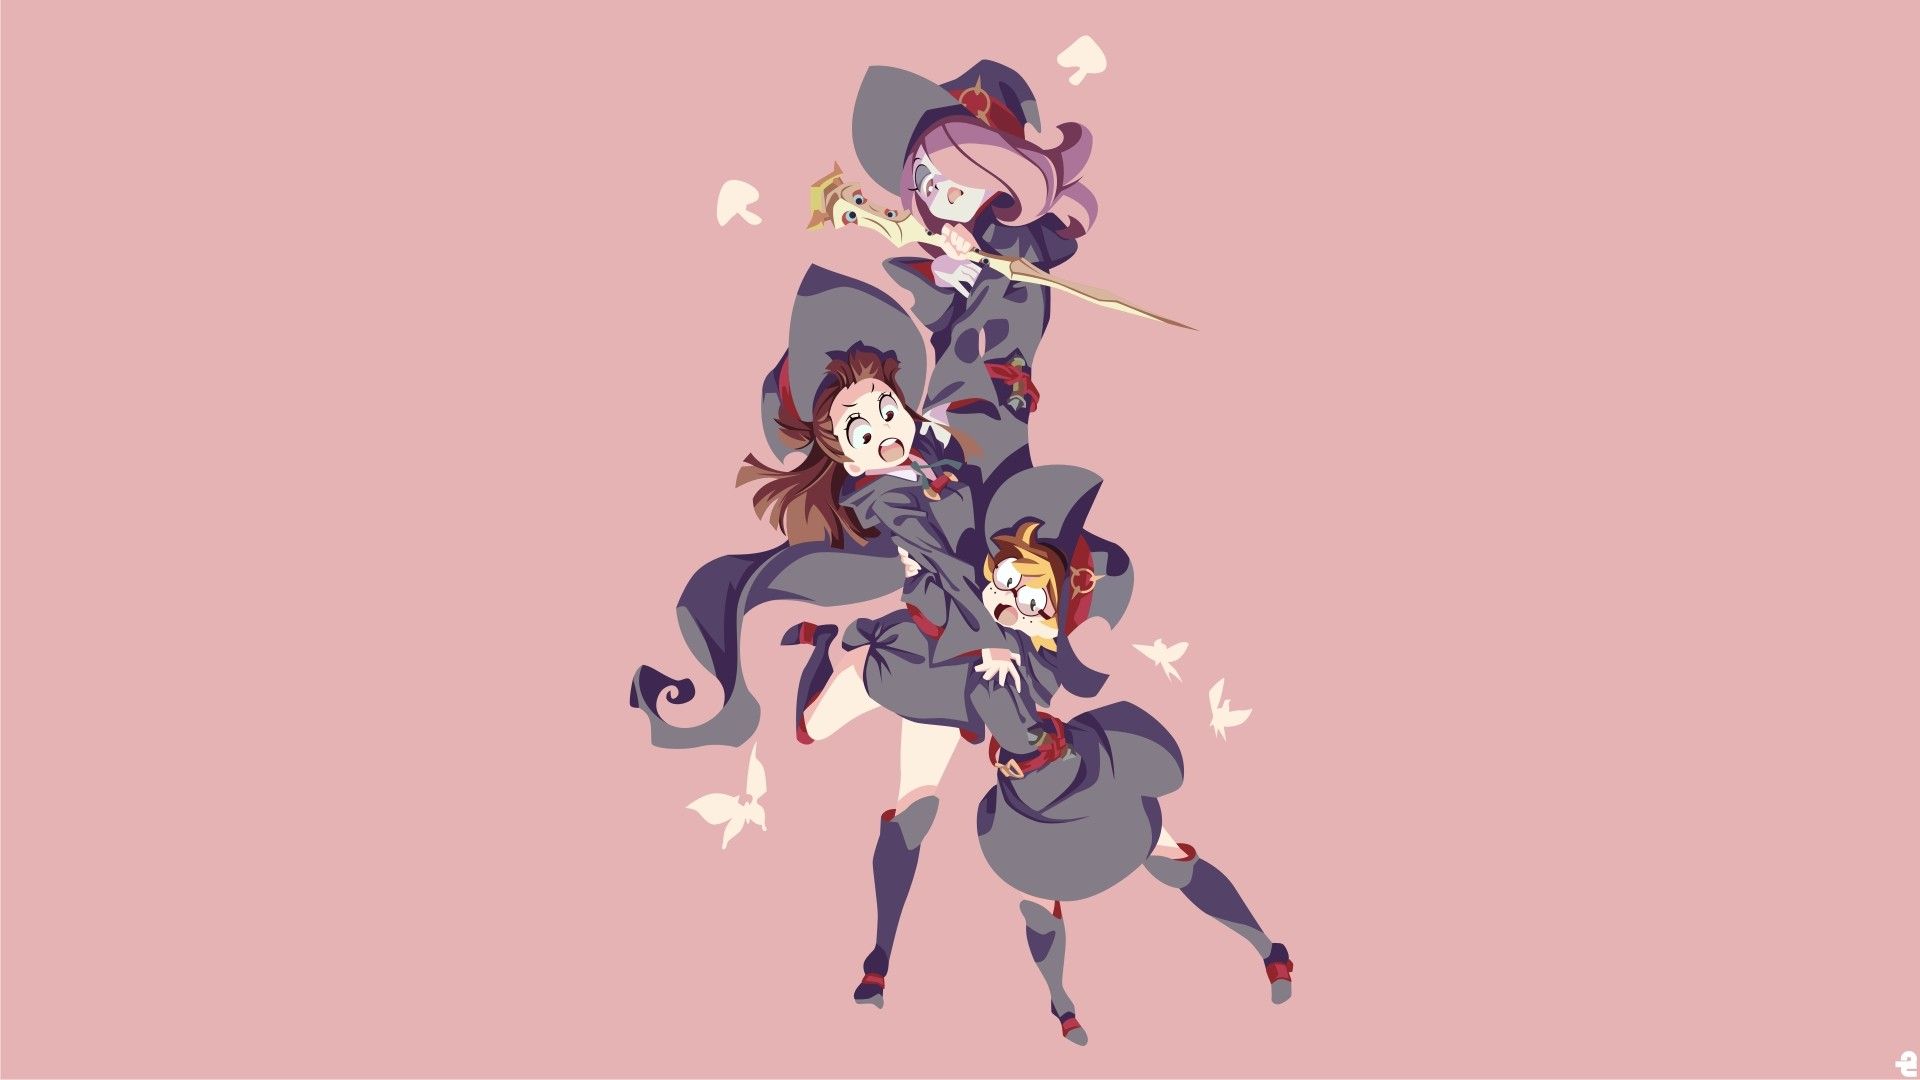 Little Witch Academia wallpaper 1920x1080 anime wallpapers 1920x1080 - Witch